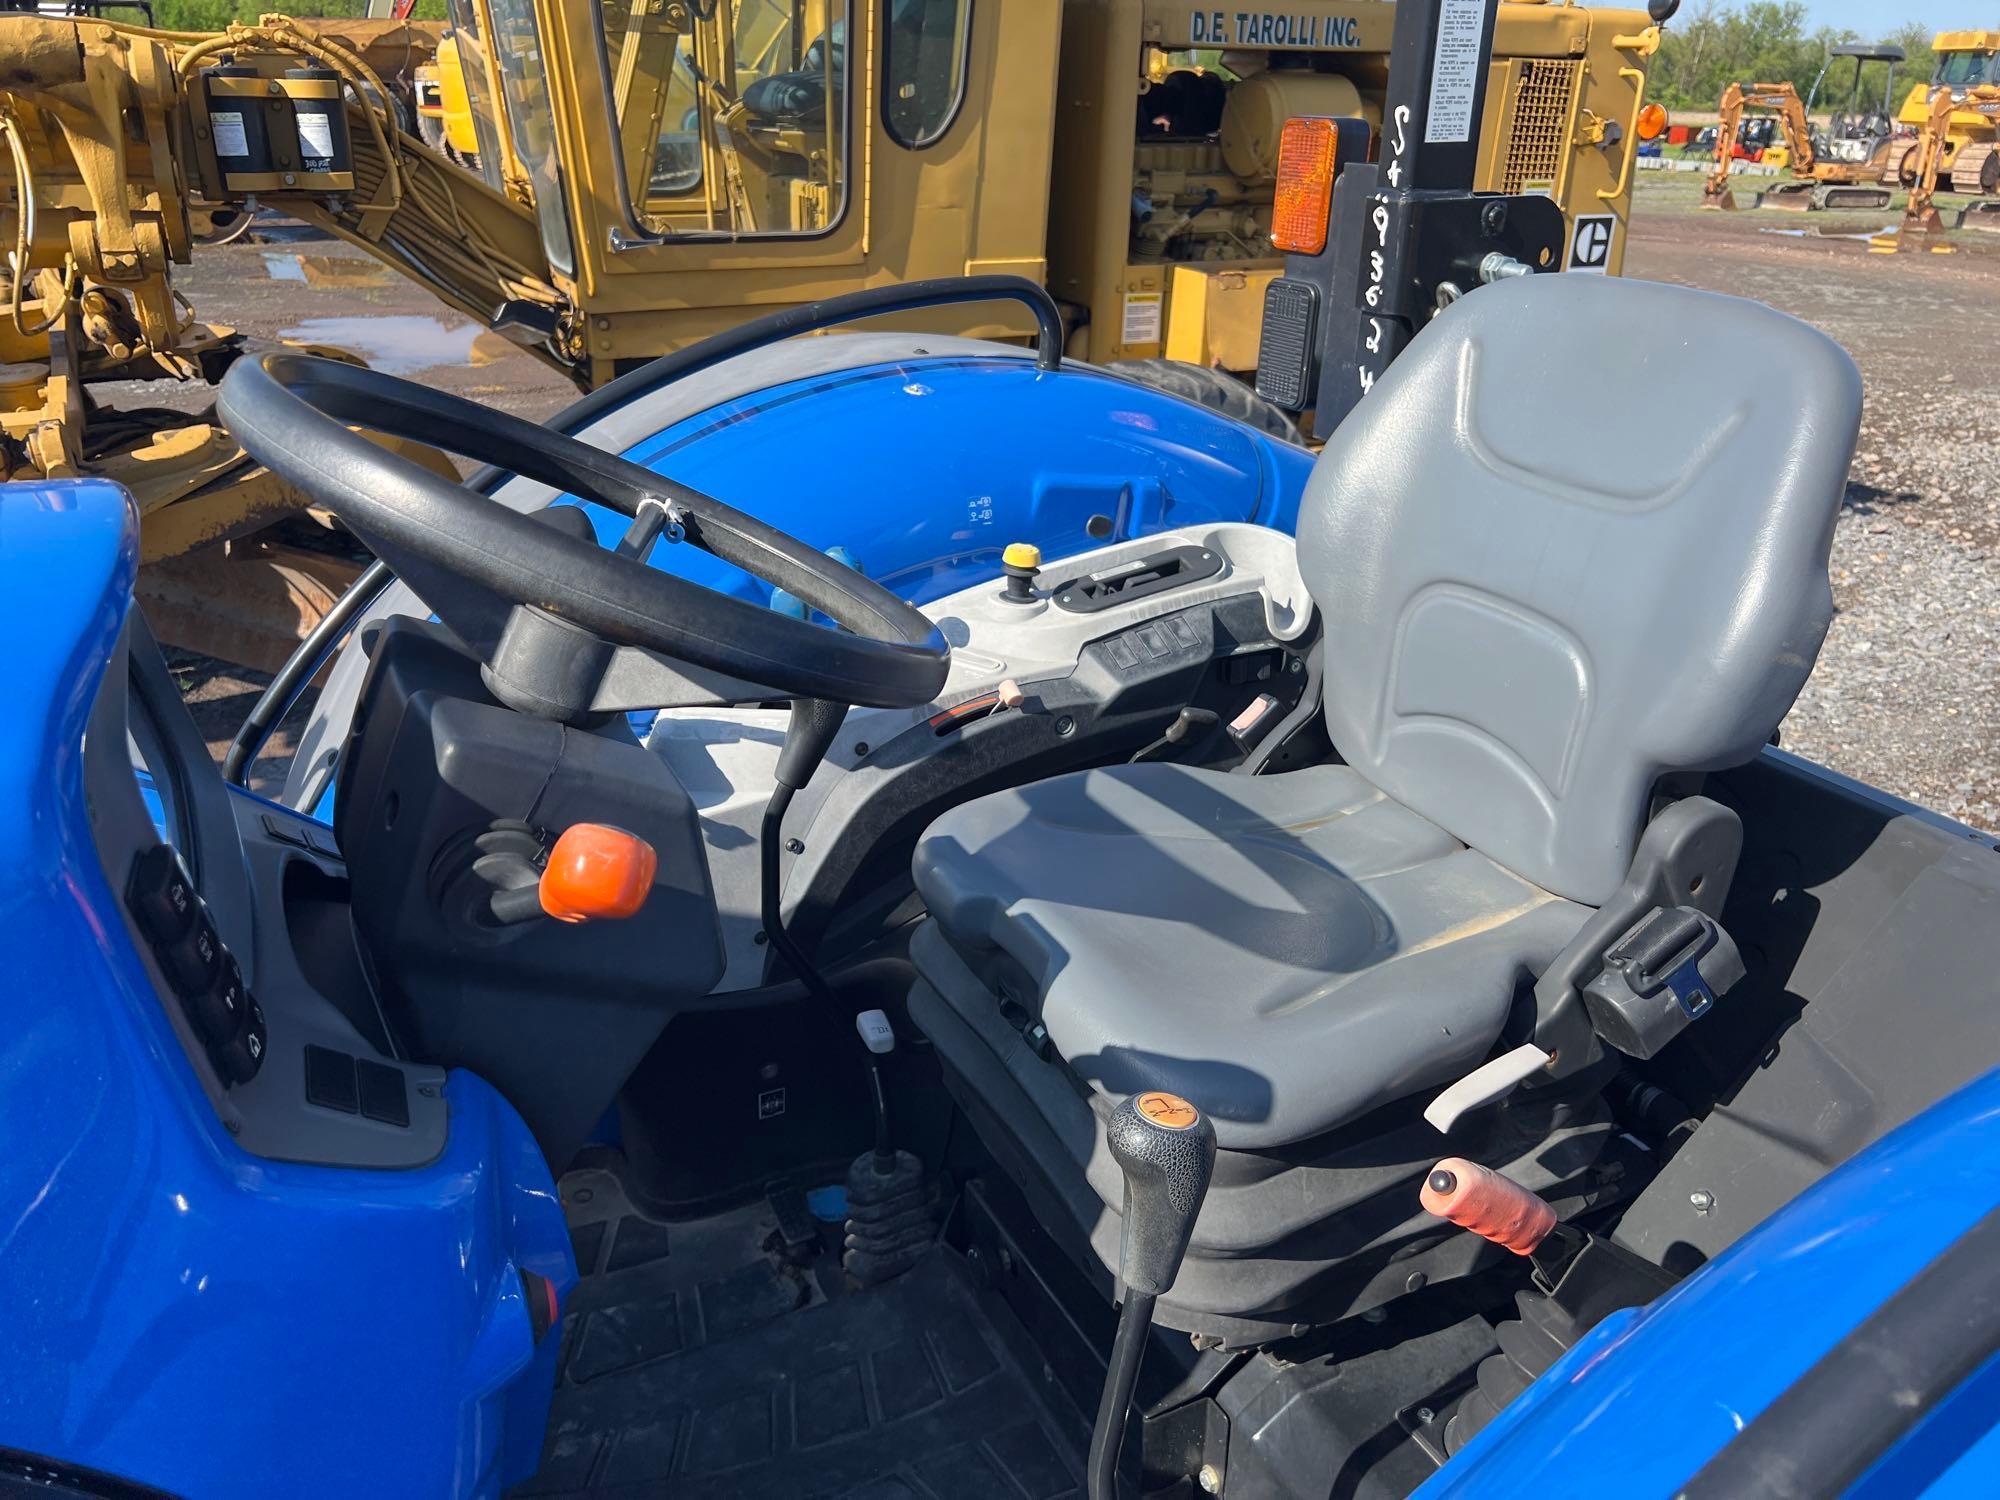 2022 NEW HOLLAND WORKMASTER 105 TRACTOR LOADER SN;NH1593624... 4x4, powered by diesel engine, equipp